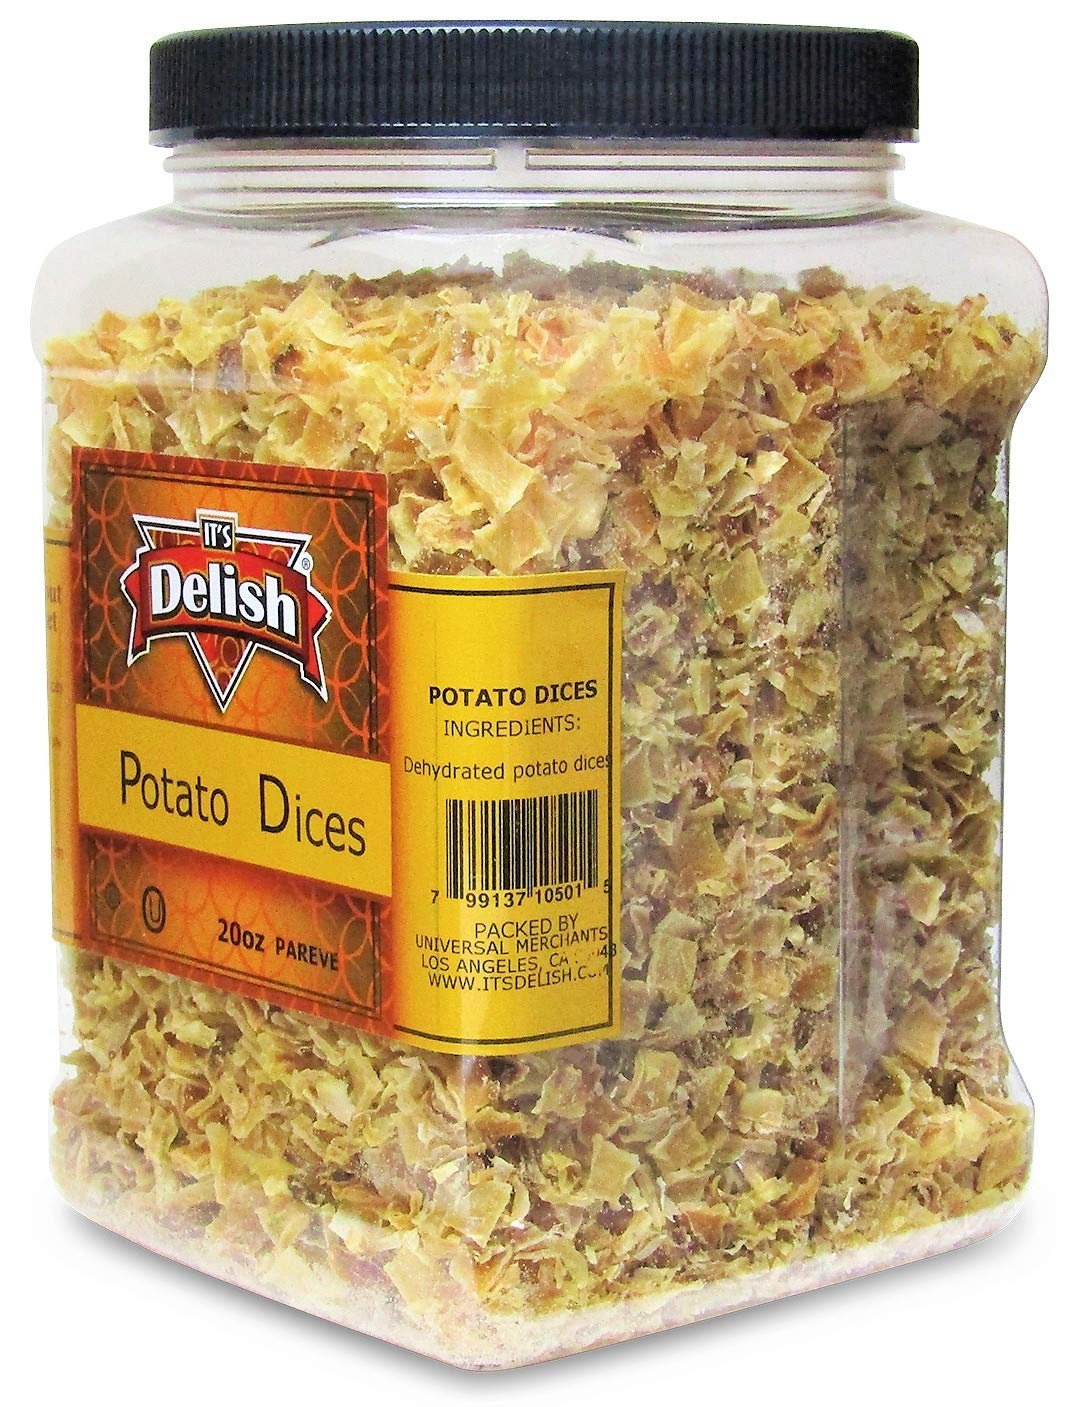 It's Delish Gourmet Dehydrated Potato Dices by Its Delish – 20 Oz Jumbo Reusable Container – All Natural Dried Potato Chopped Cubes 